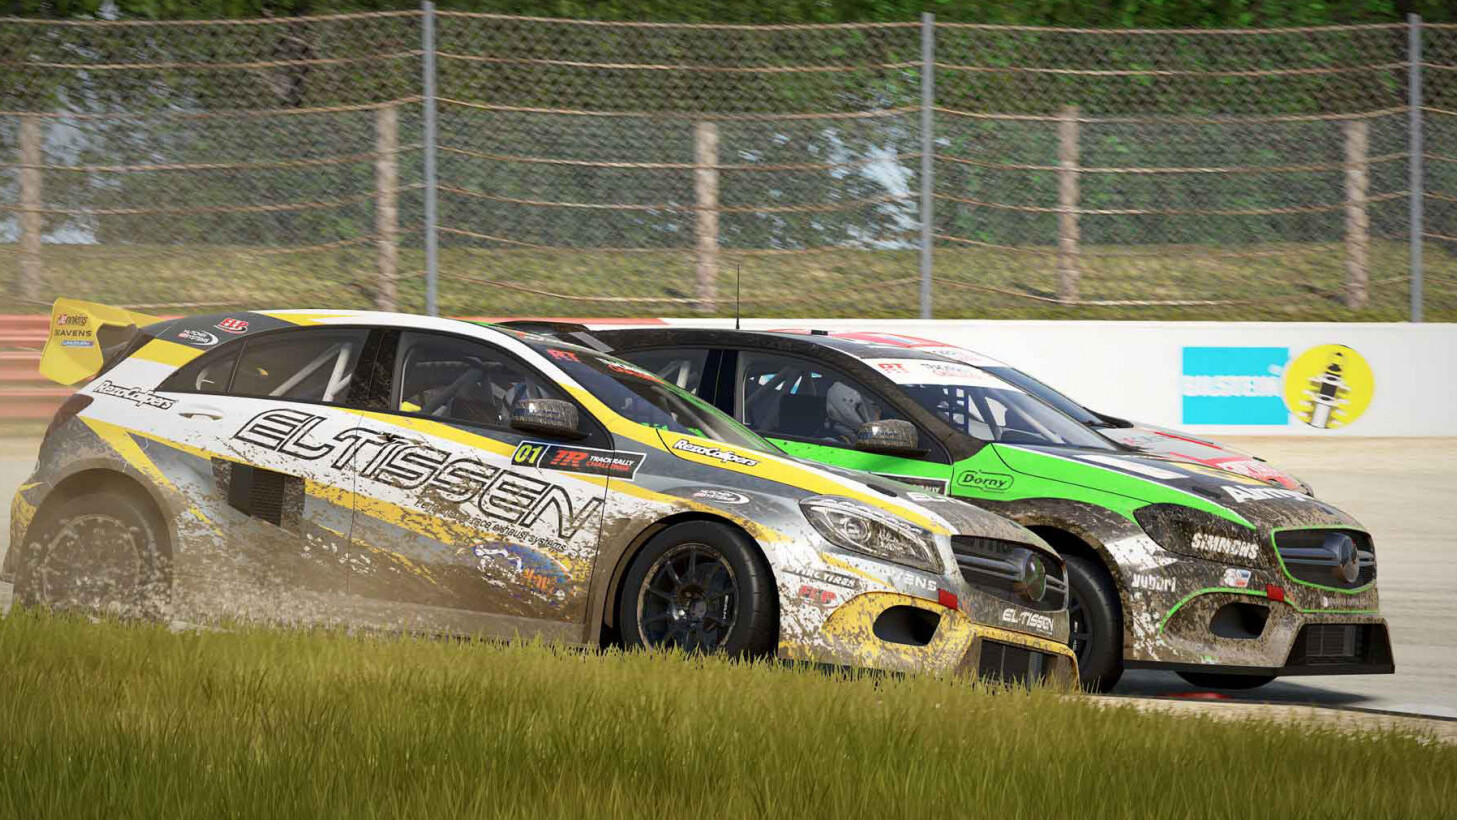 Project Cars game studio is working on “the most powerful console ever built”